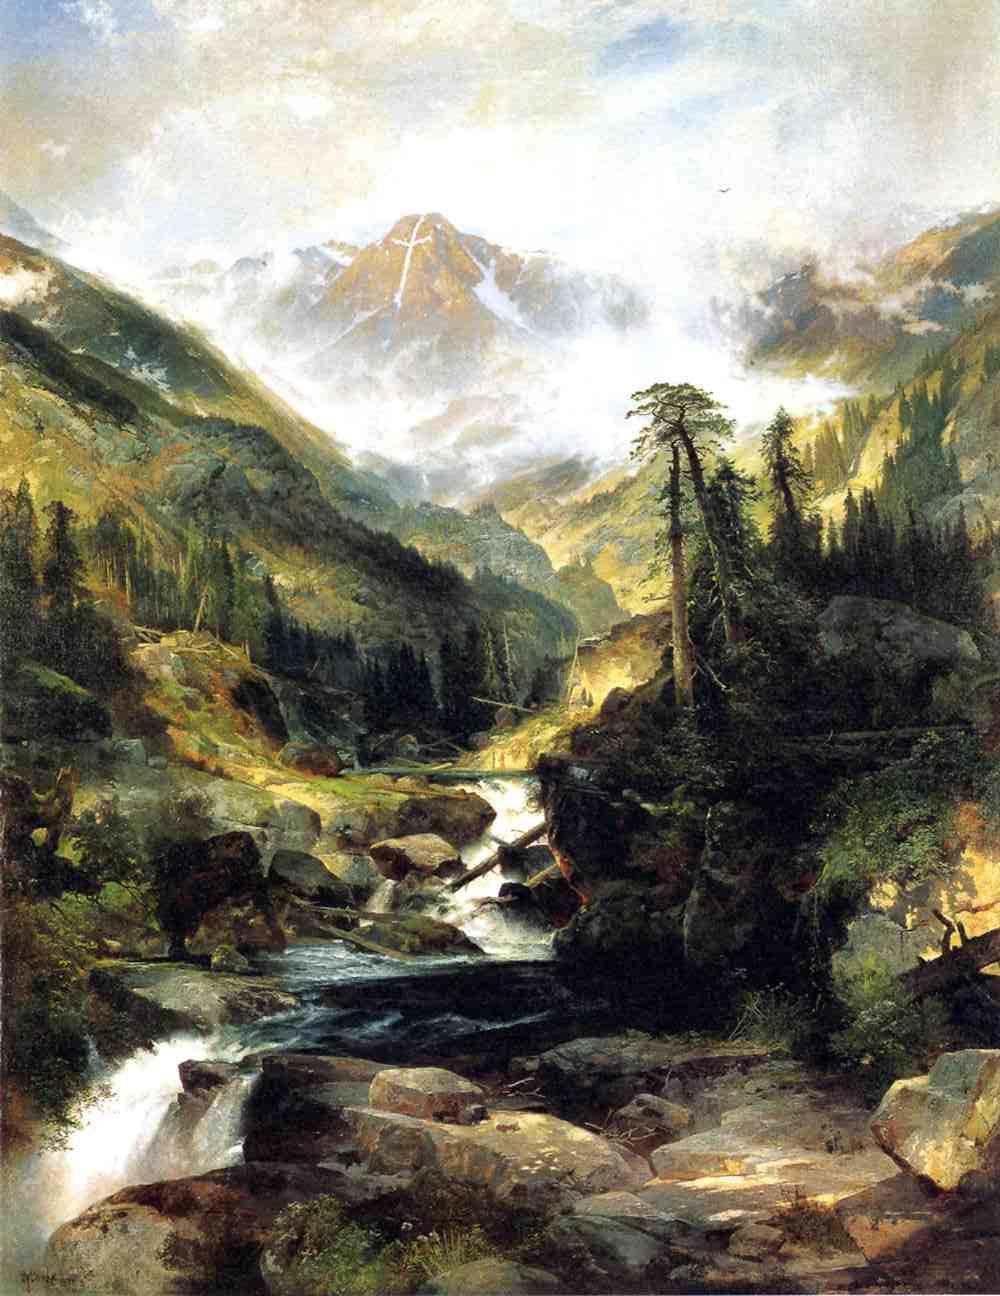 Masterpieces Referenced: Cross in the Wilderness, by Frederic Edwin Church, 1857 http://commons.wikimedia.